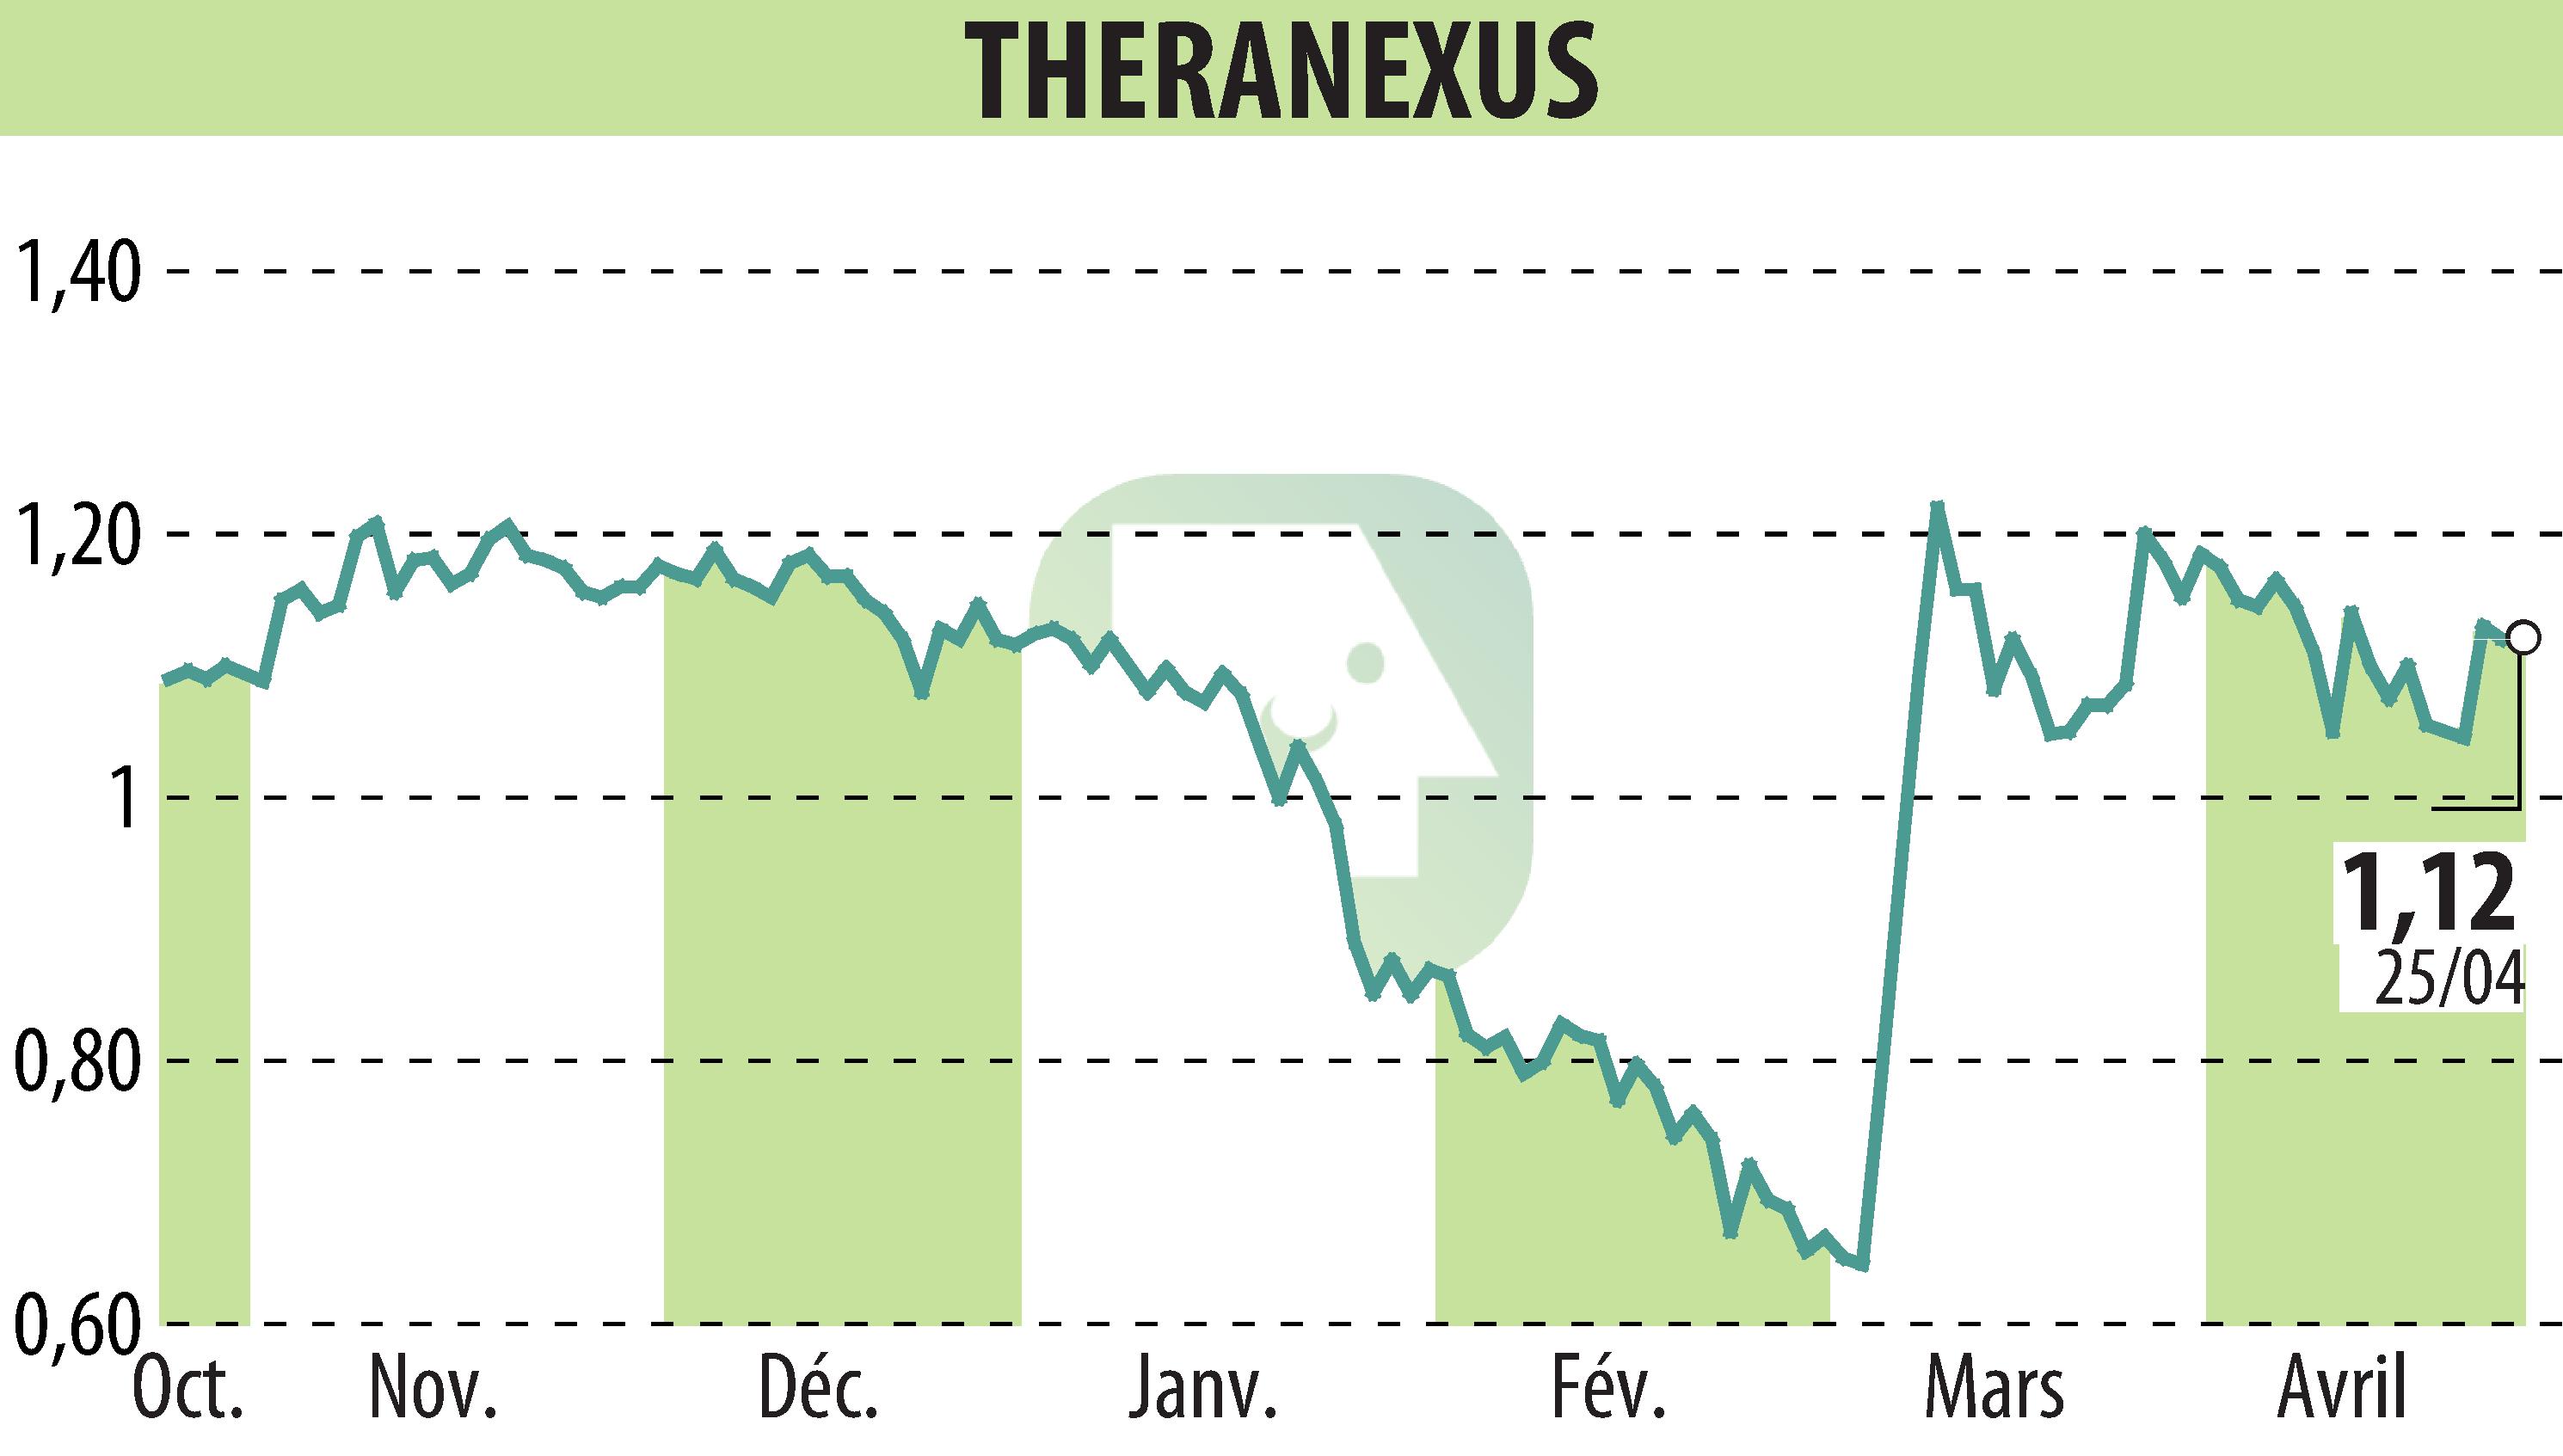 Stock price chart of Theranexus (EPA:ALTHX) showing fluctuations.